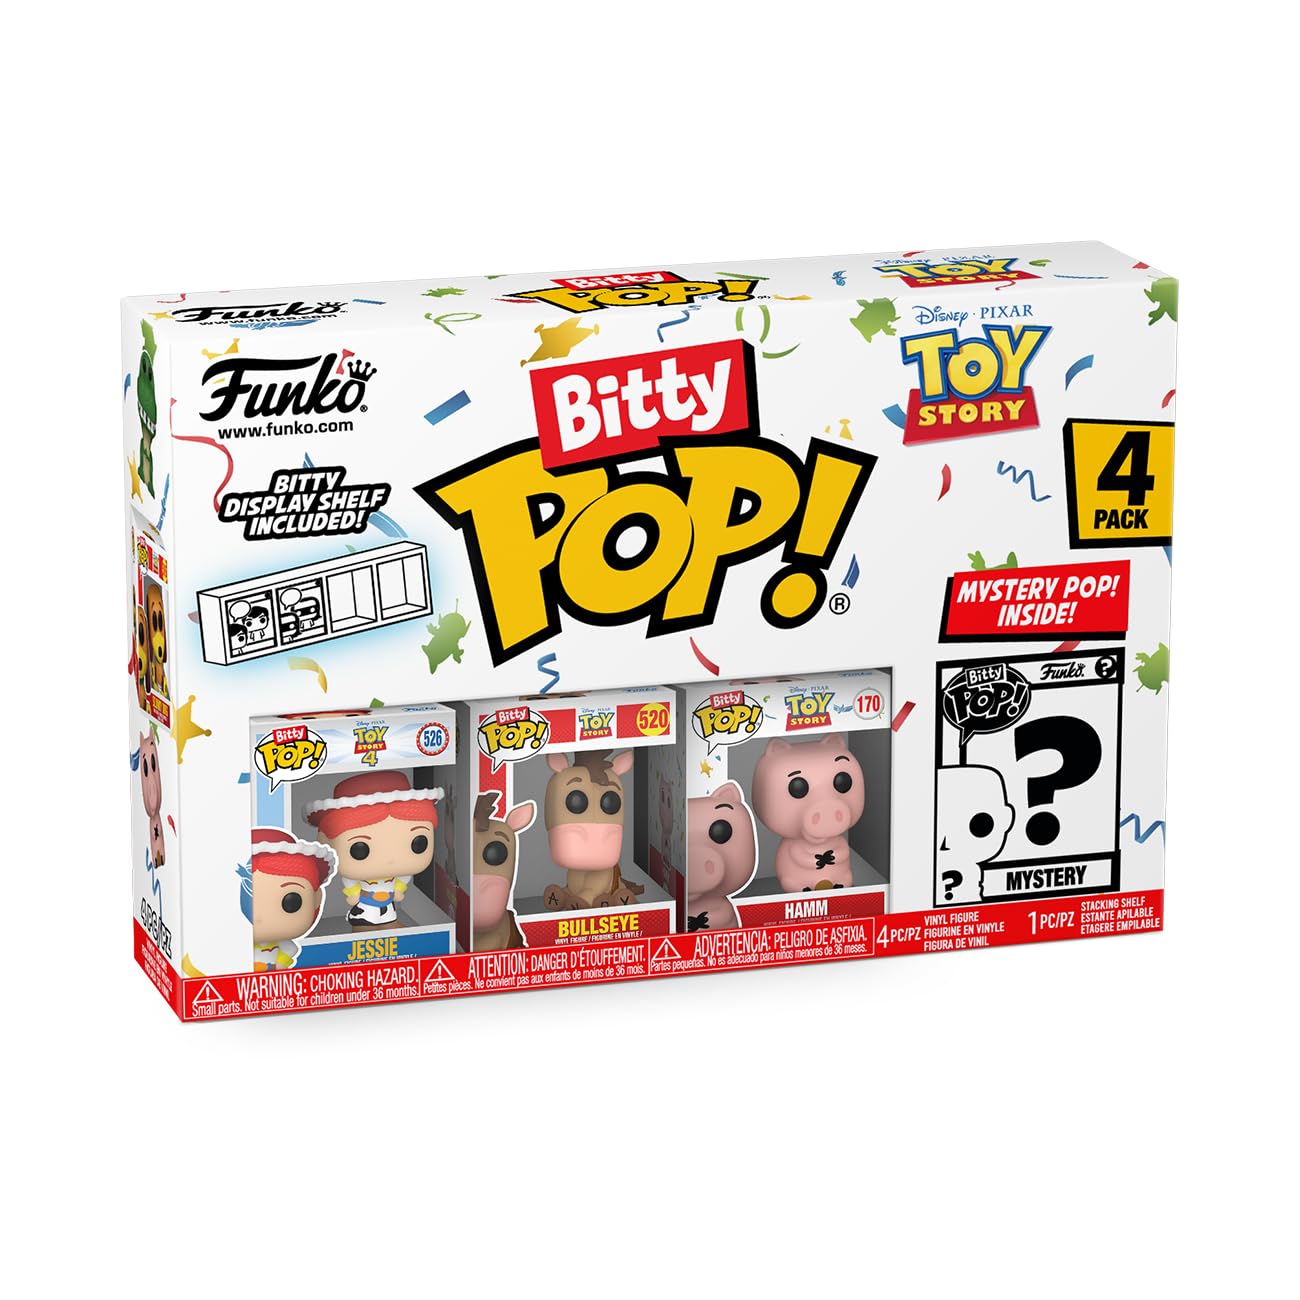 Funko Bitty Pop!: Toy Story Mini Collectible Toys 4-Pack - Jessie, Bullseye, Hamm & Mystery Chase Figure (Styles May Vary) - amzGamess